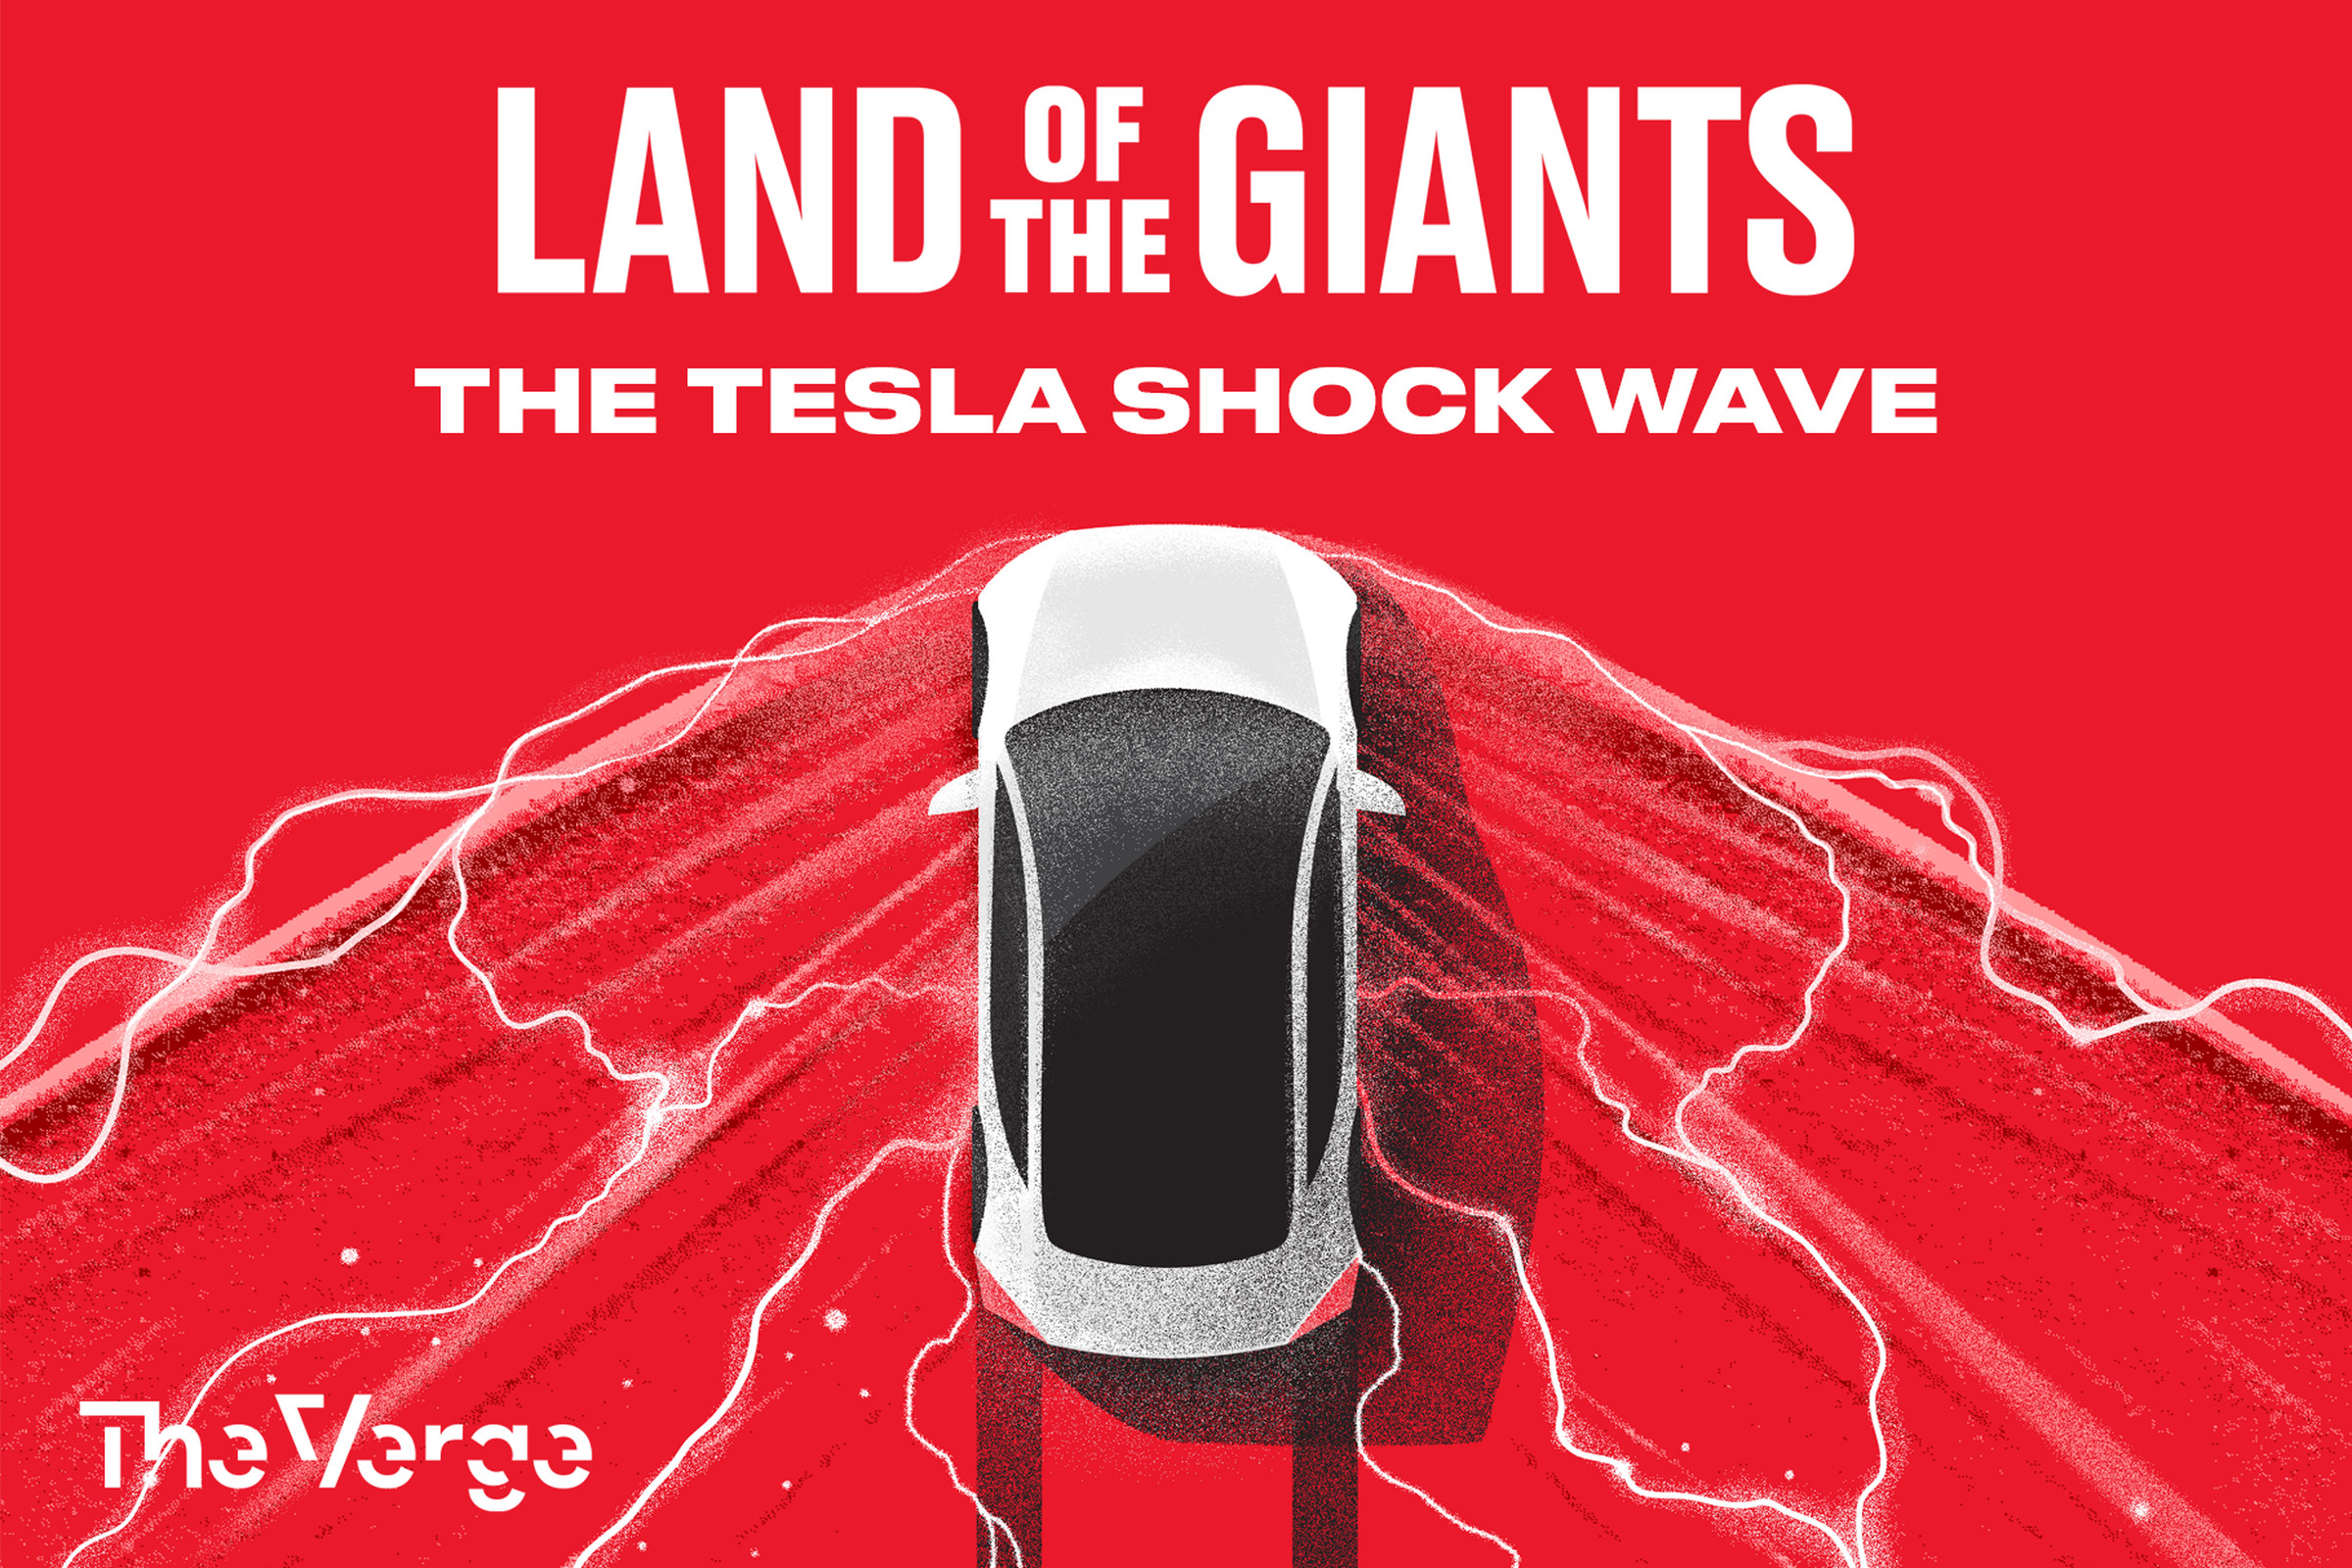 Land of the Giants podcast about Tesla